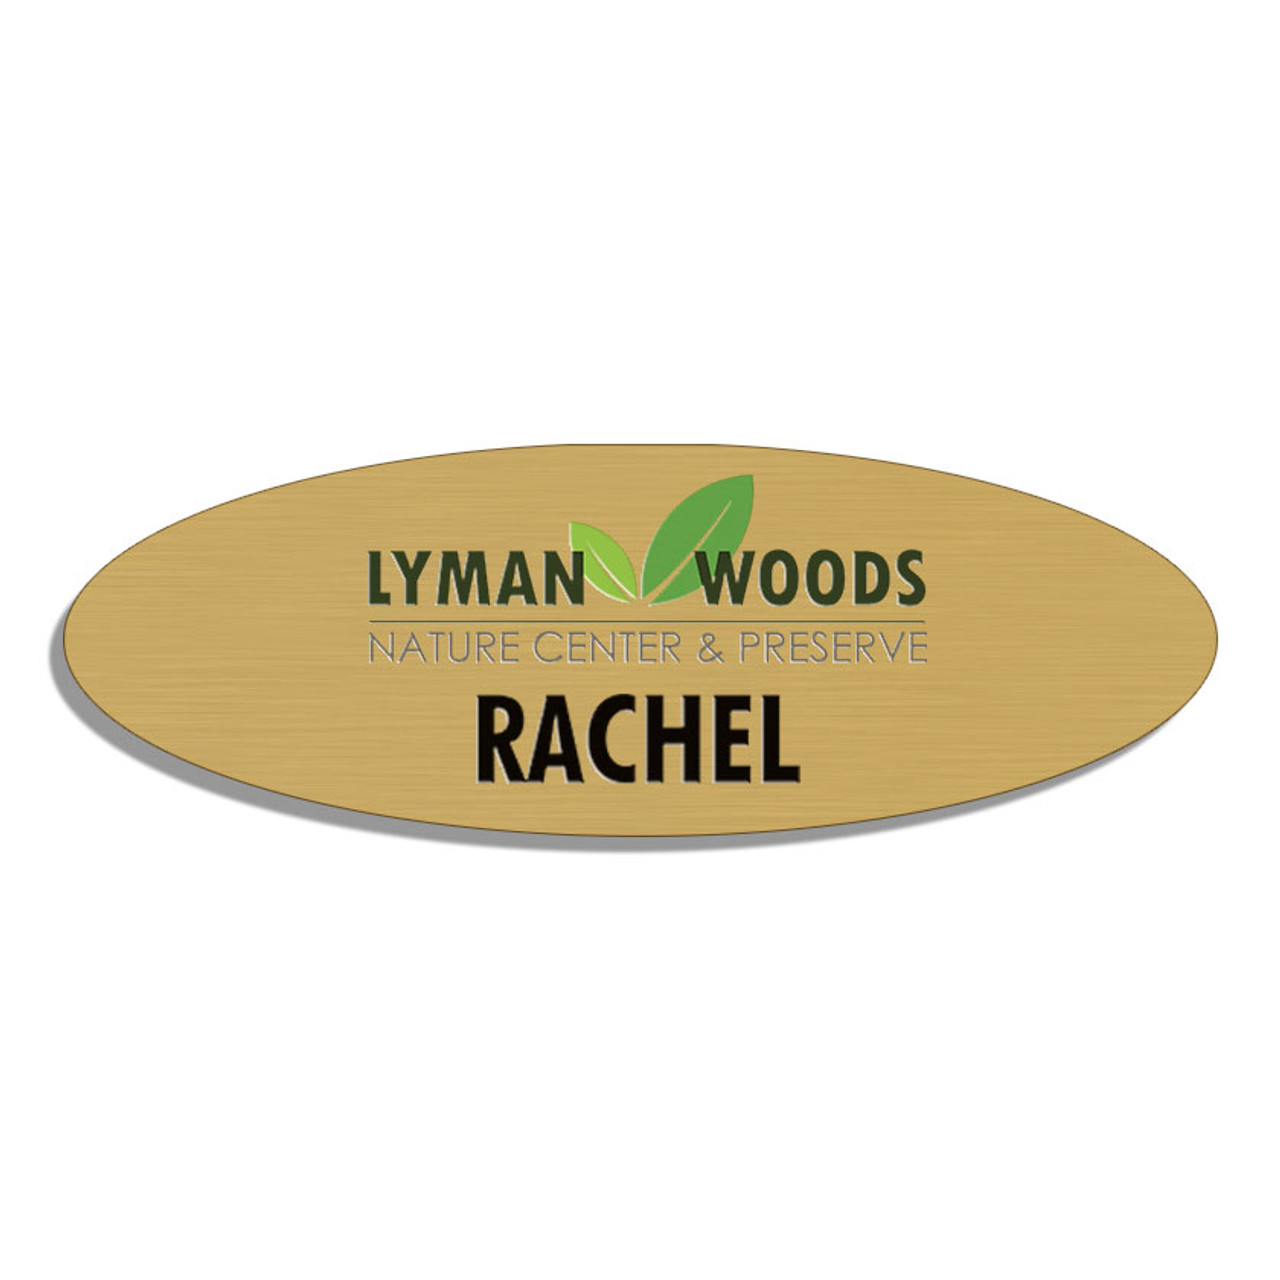 1-x-3-metallic-style-printed-name-badges-oval-classic-metal-style